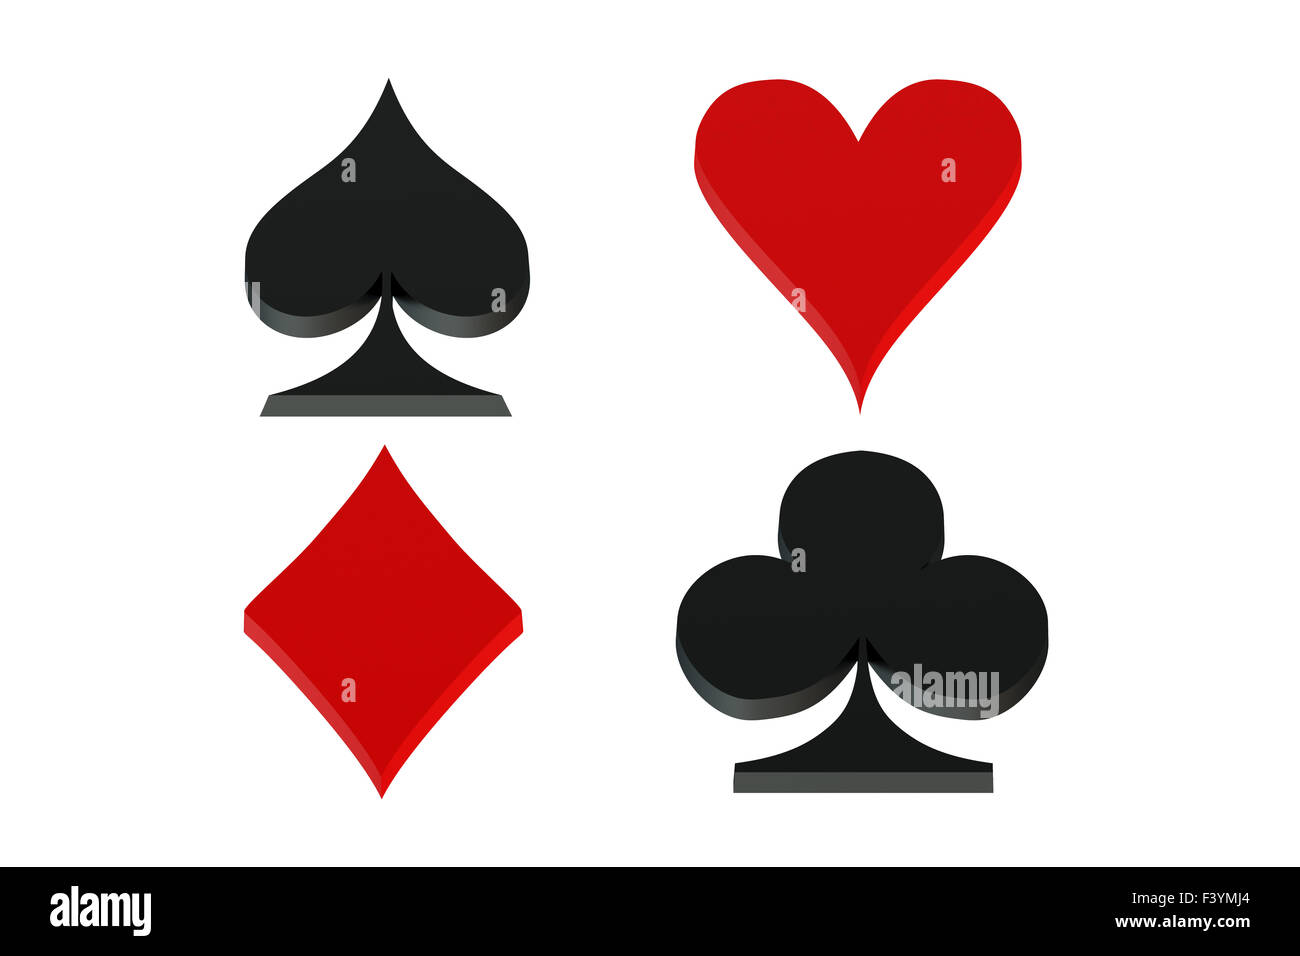 Playing card suits Royalty Free Vector Image - VectorStock